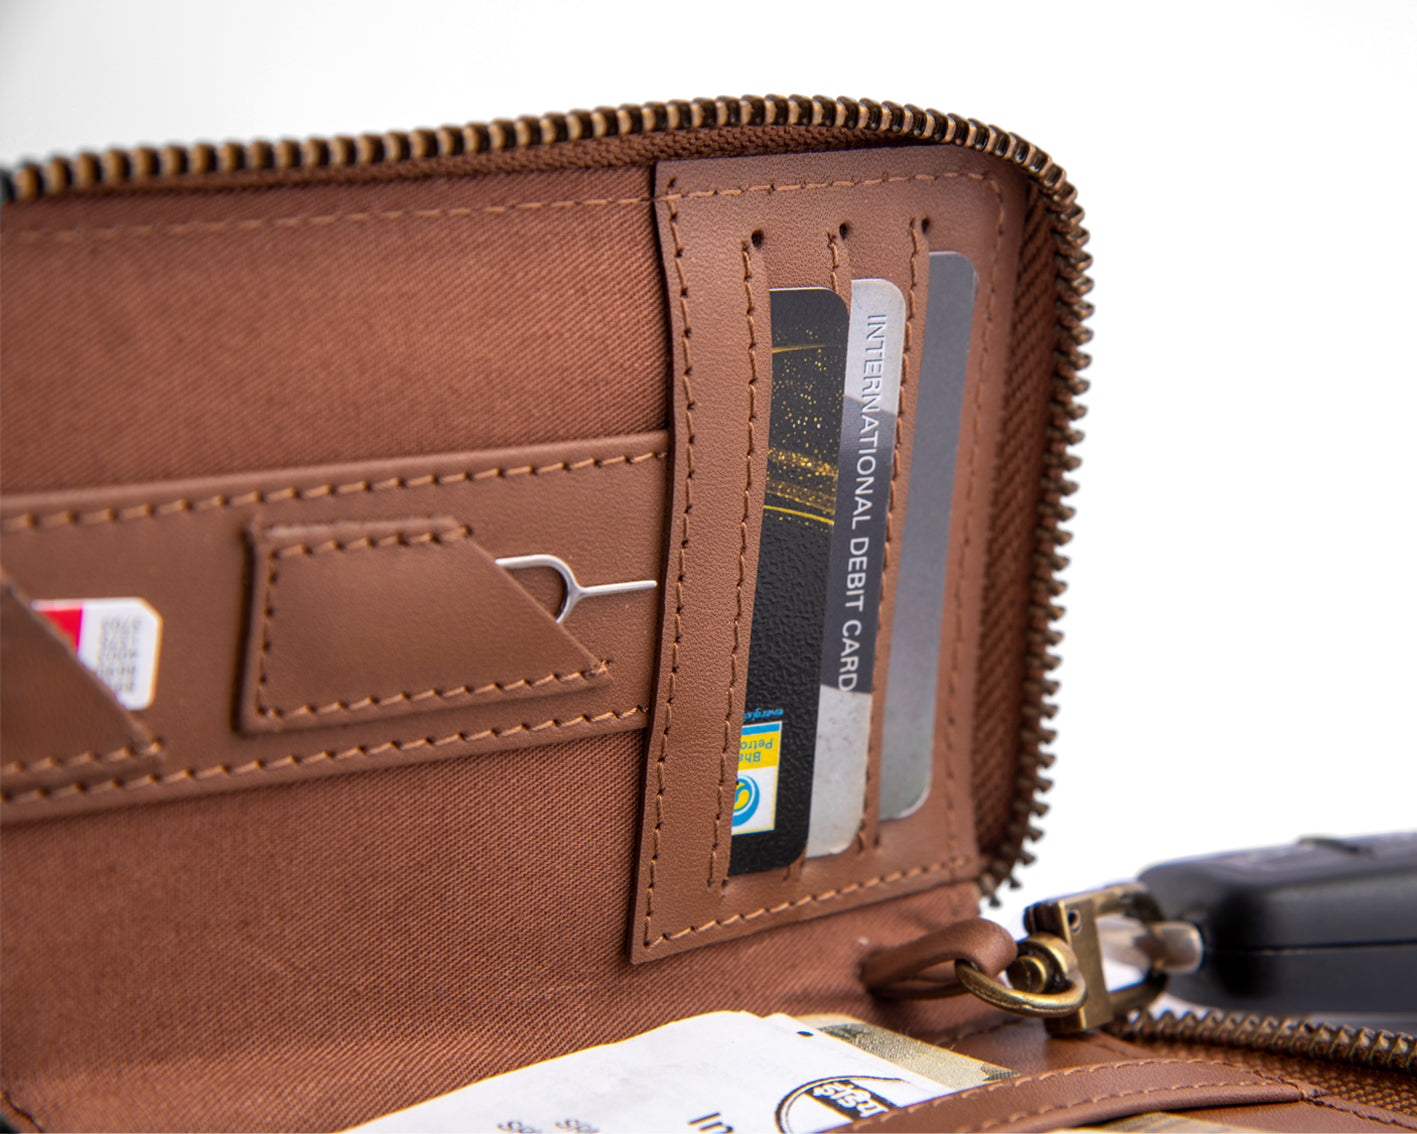 Classic Flap Wallet Conversion Kit with Zipper Bag & O Rings 